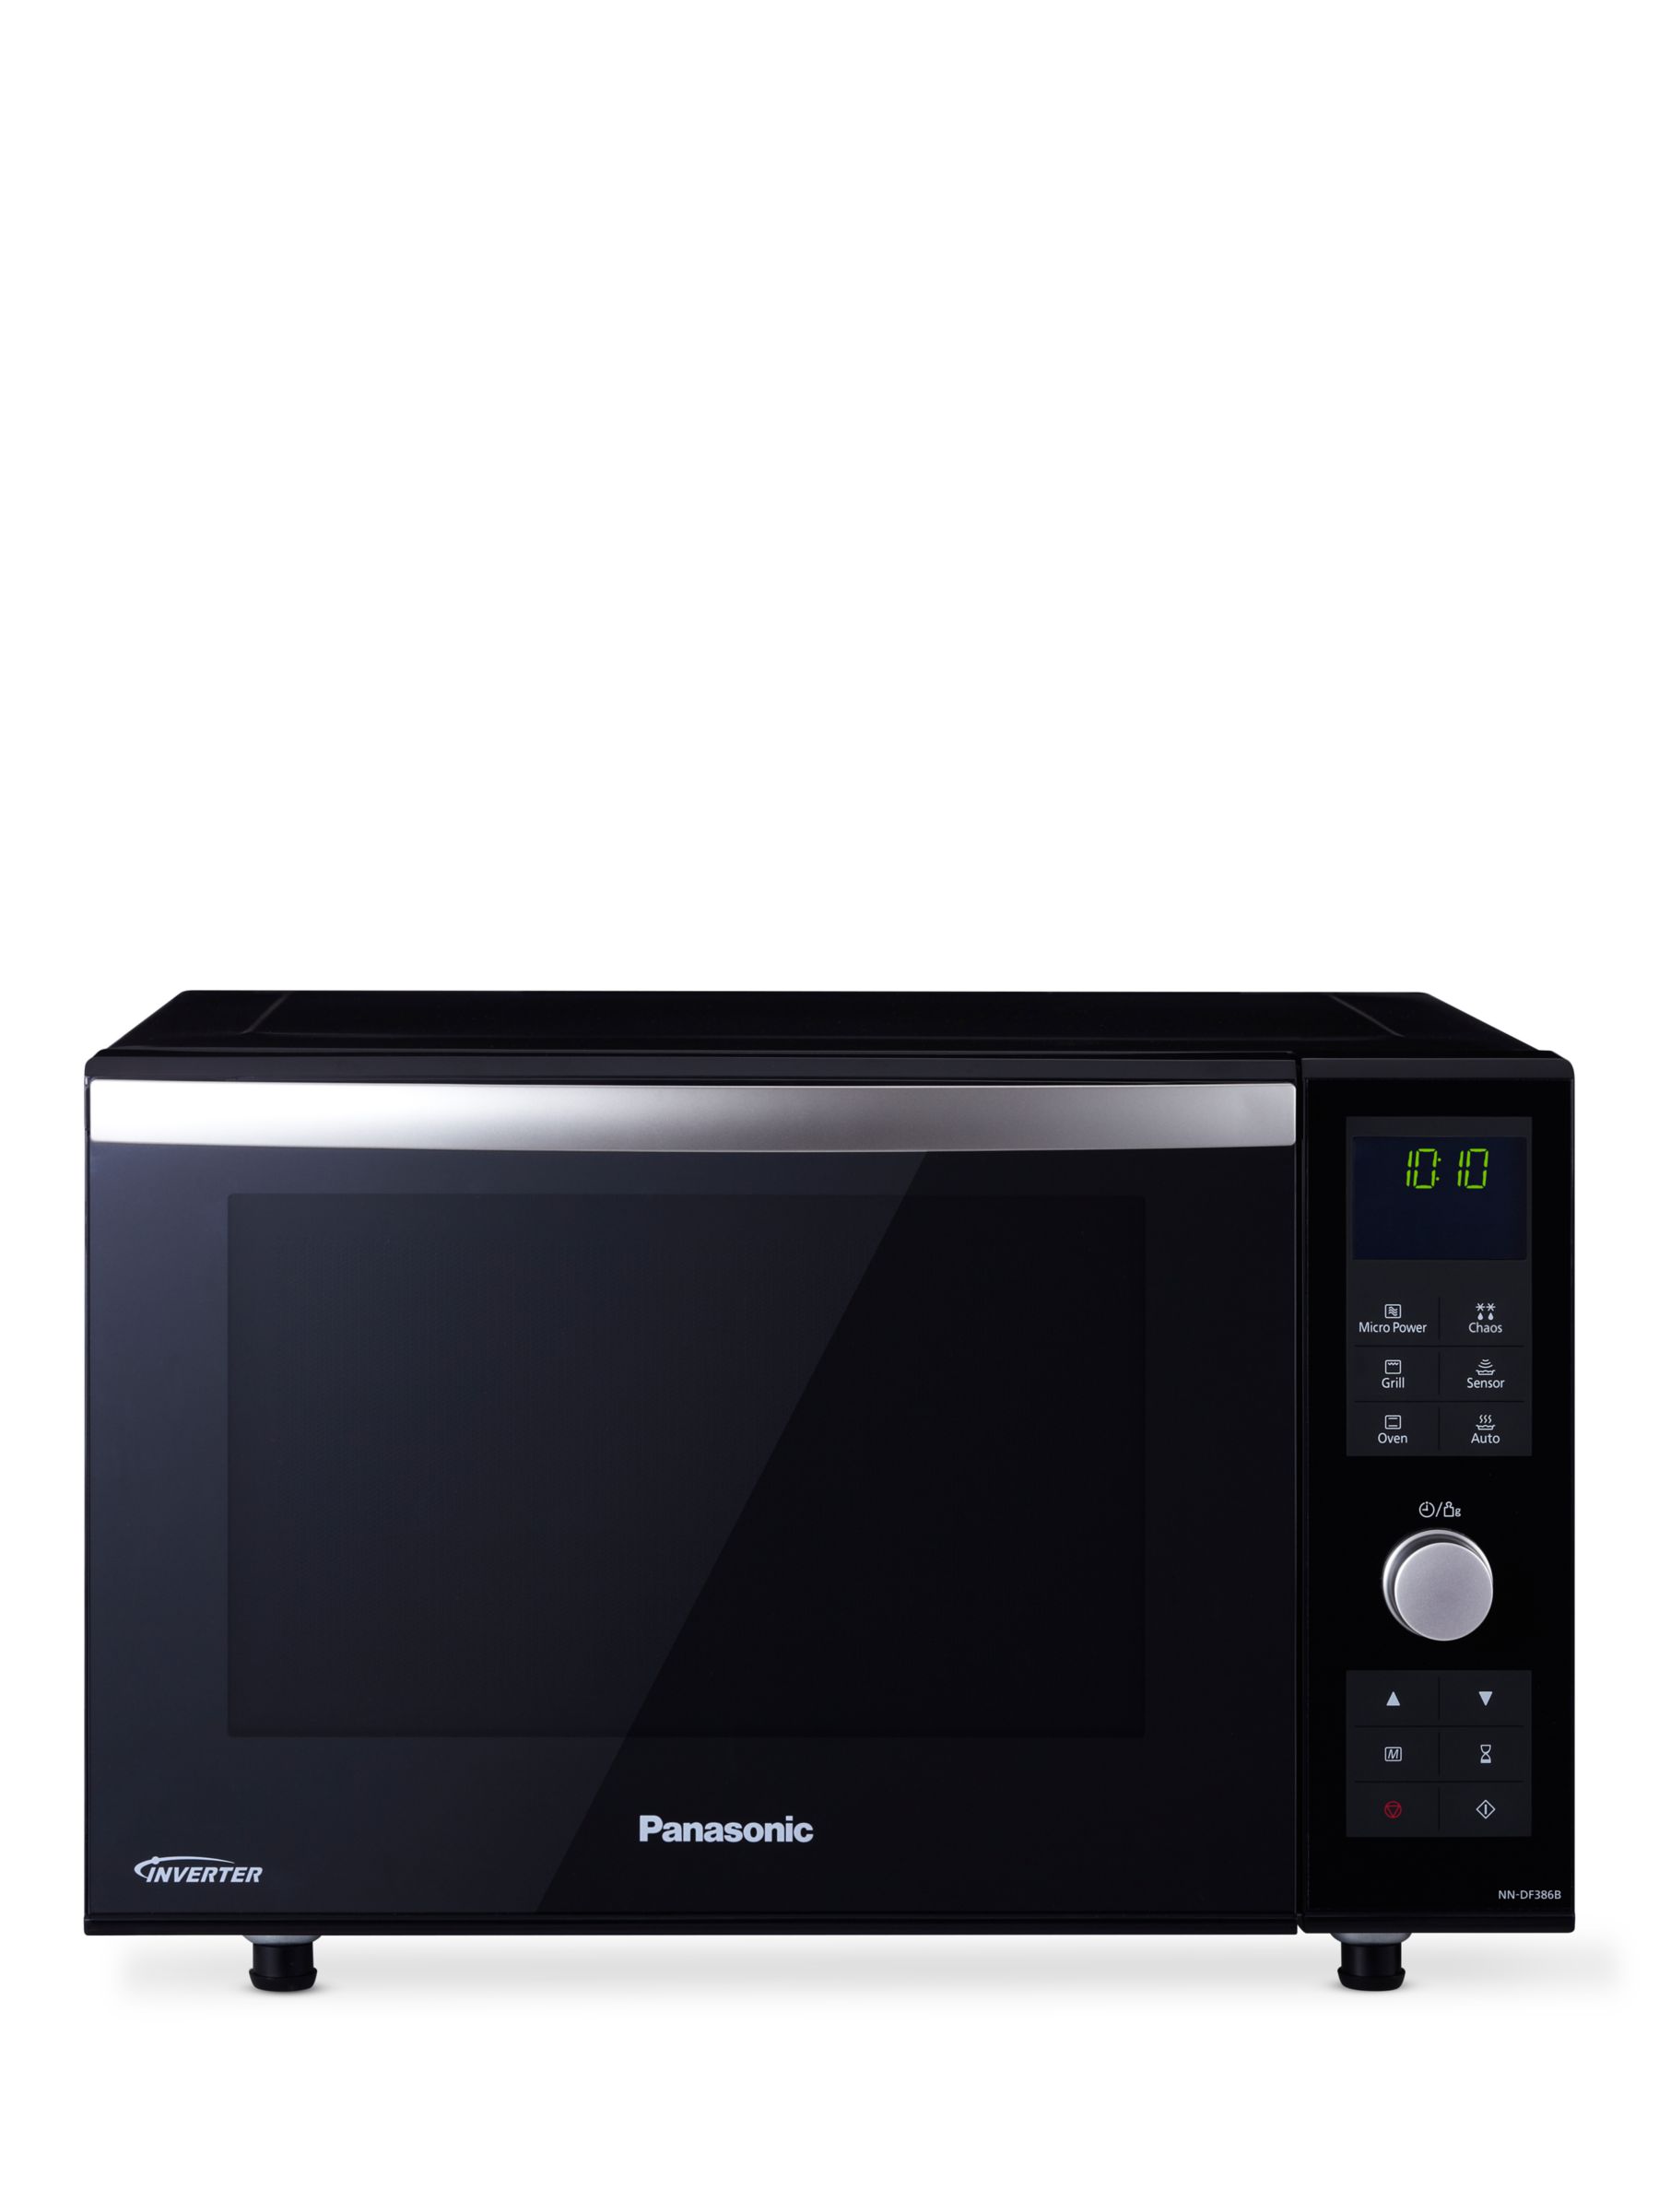 Panasonic NN-DF386BBP Freestanding 3-in-1 Combination Microwave Oven with Grill, Black Review thumbnail